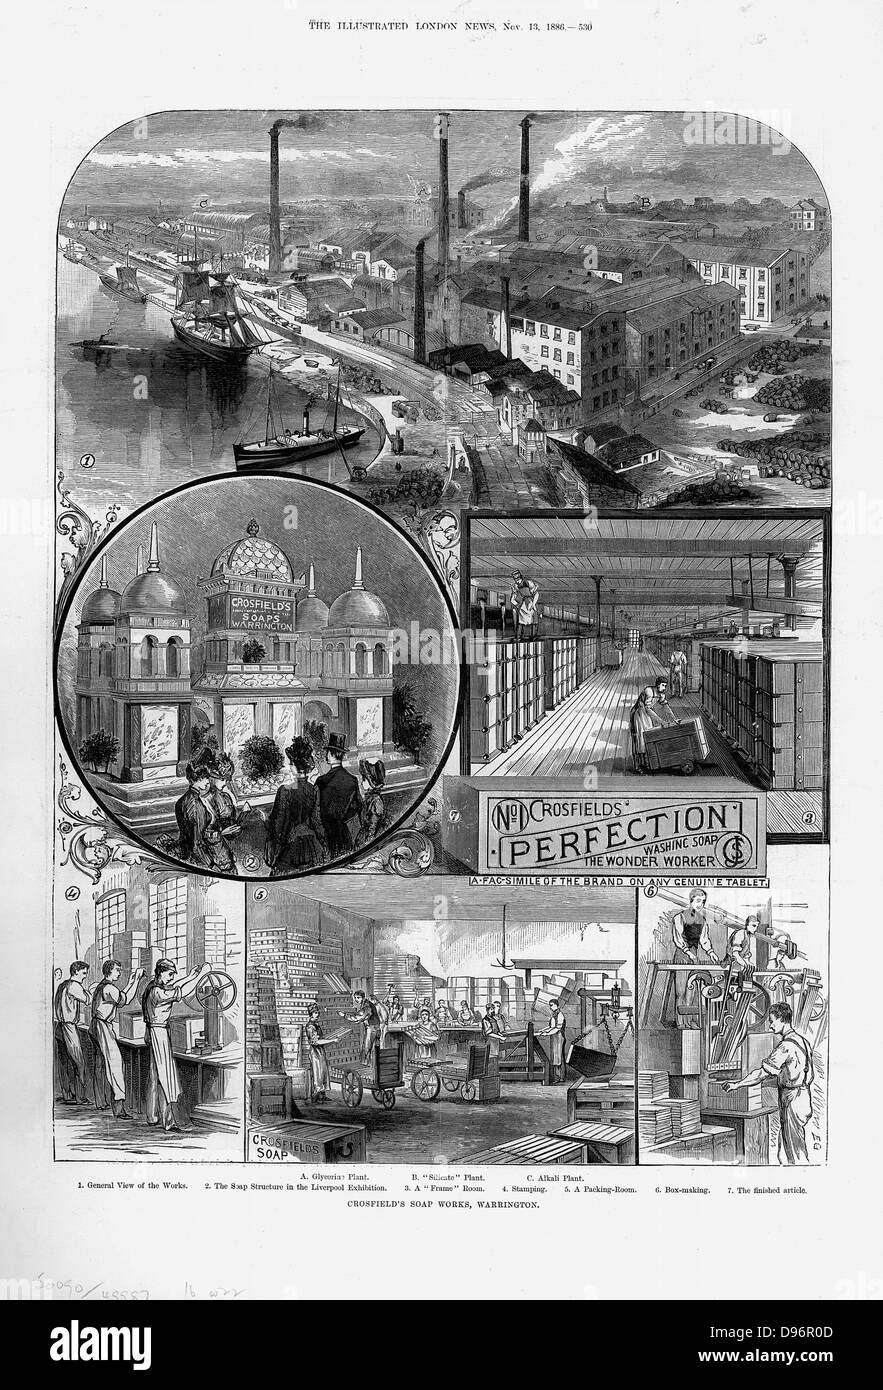 Joseph Crosfield & Son's soap factory at Bank Quarry, Warrington. A: Glycerine Plant B: Silicate Plant C: Alkali Plant 1: General view of works 2: Display at Liverpool Exhibition  3: Frame Room  4: Stamping  5: Packaging Room  6: Box Making  7: Bar of soap. Stock Photo